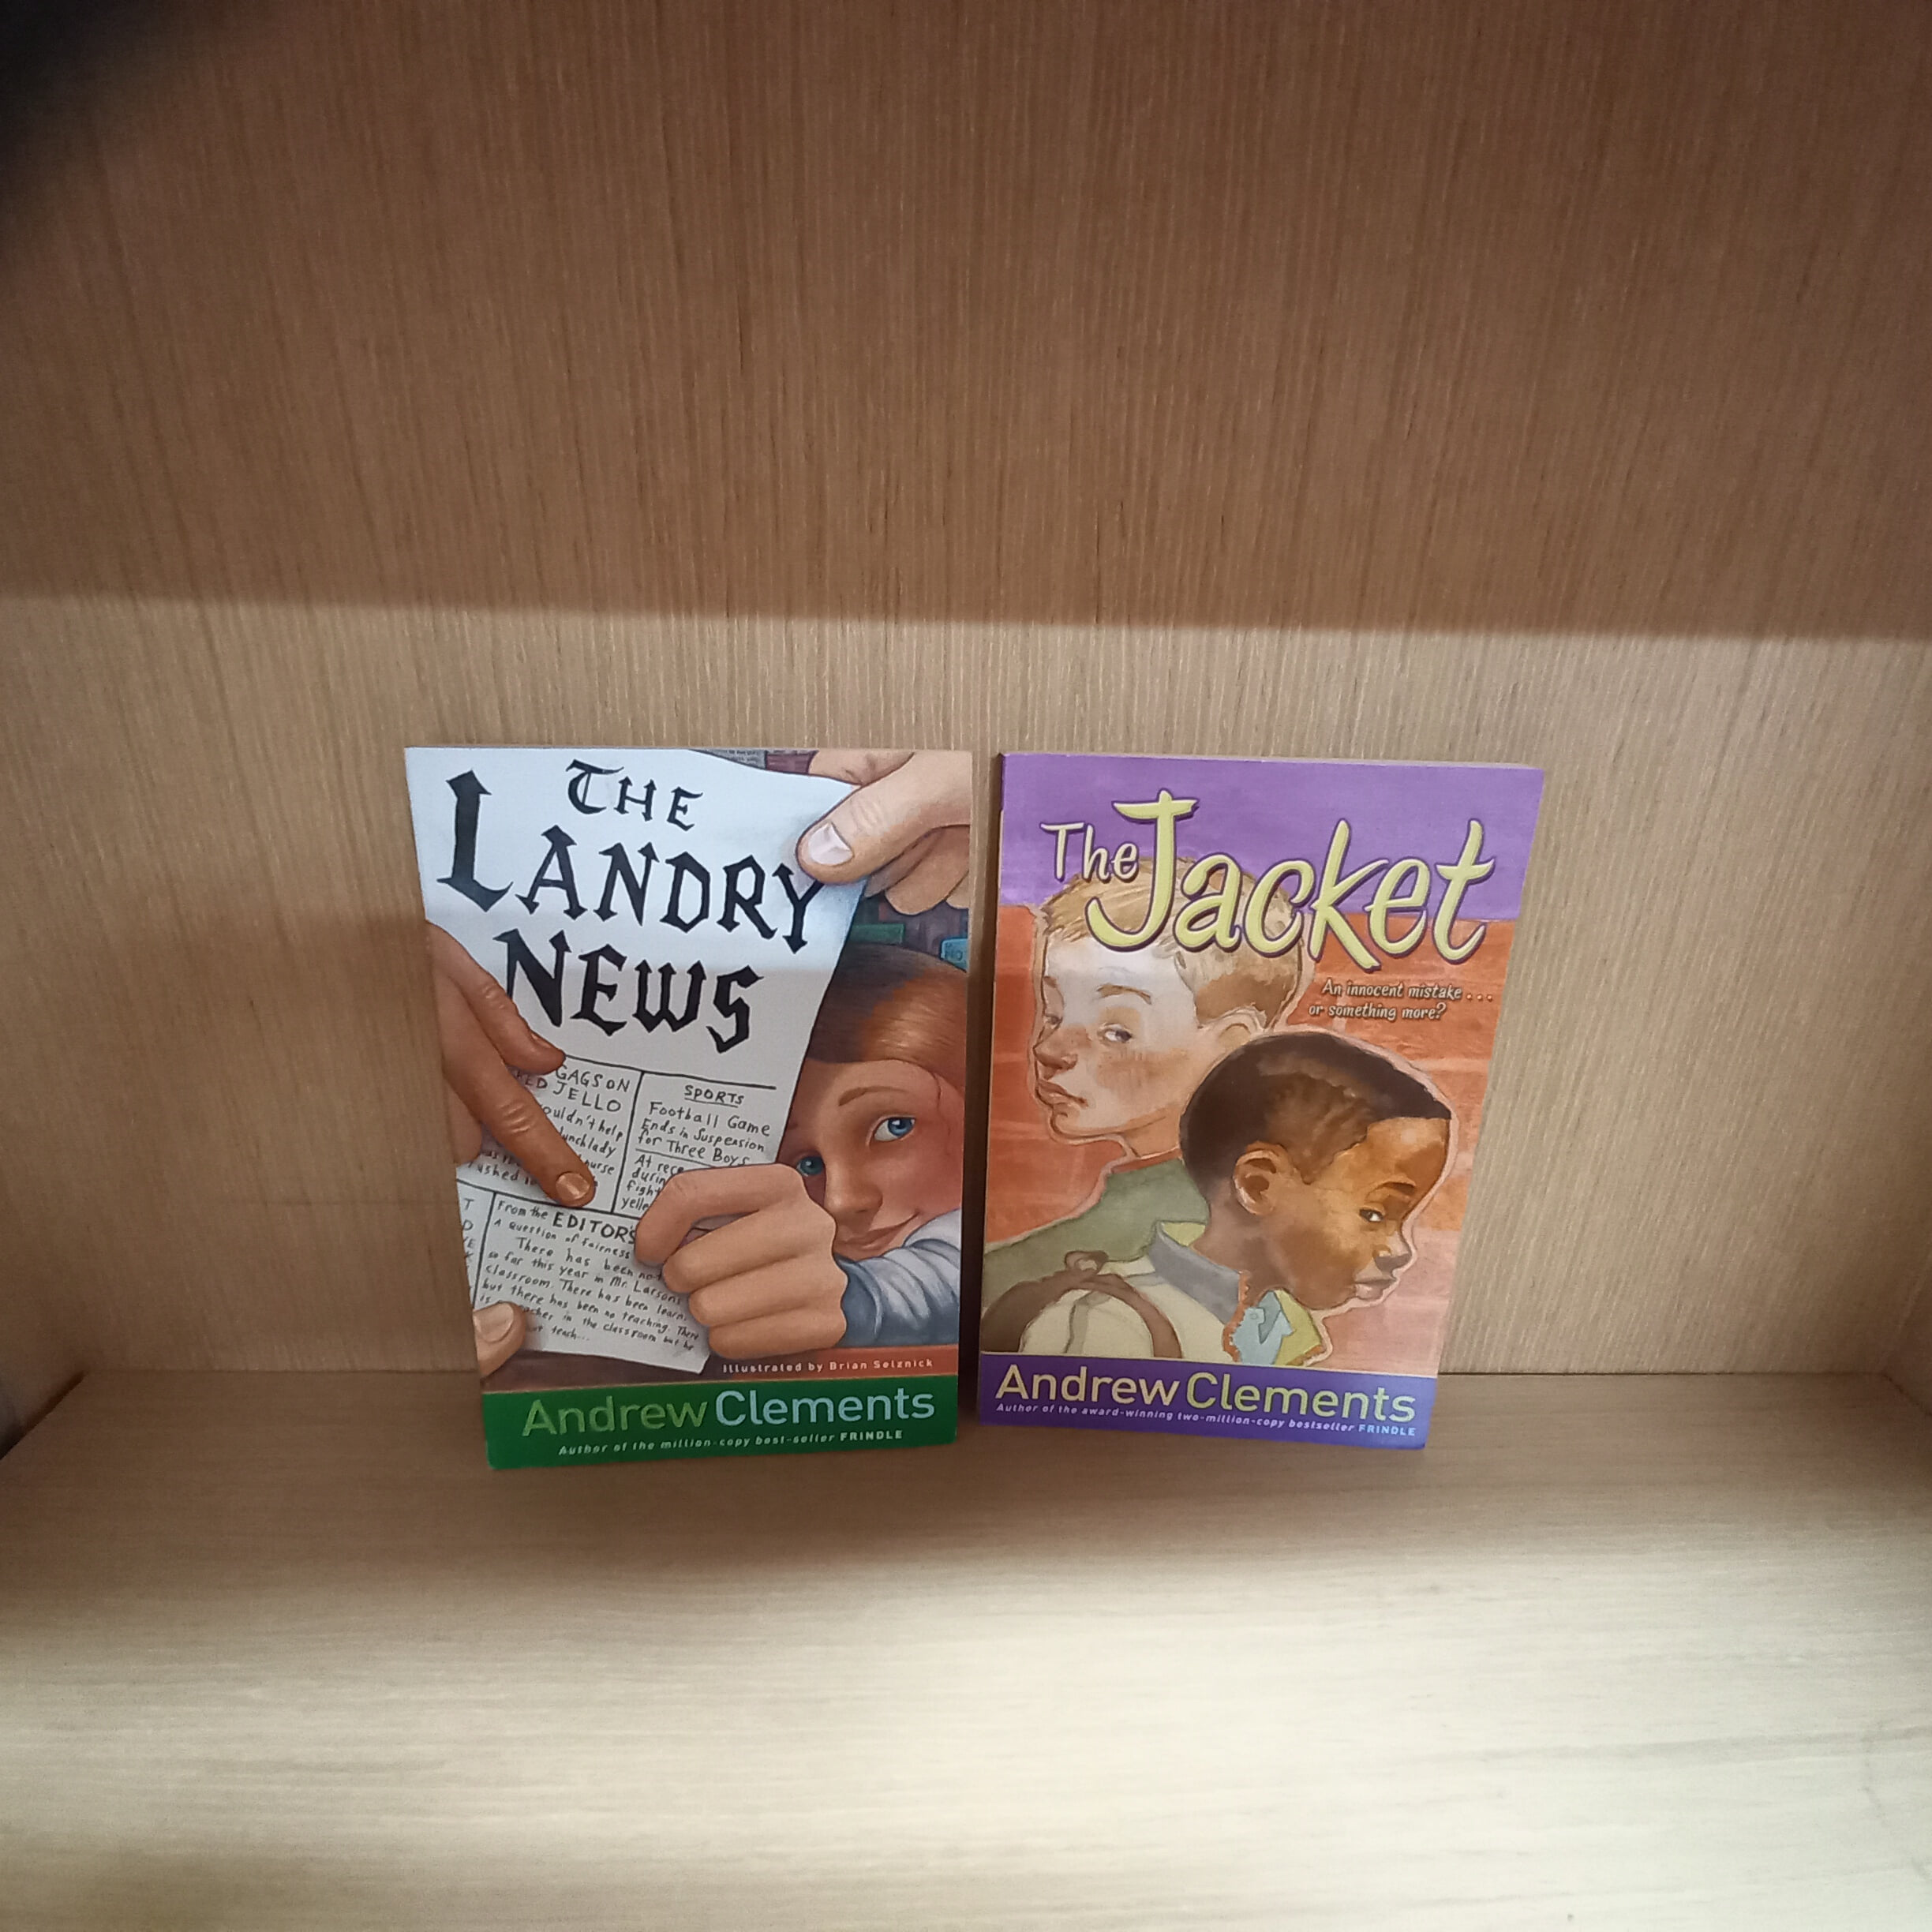 andrew clements 앤드루 클레먼츠 5권세트 (Frindle, the landry news,the report card,the janitor's boy,the jacket )